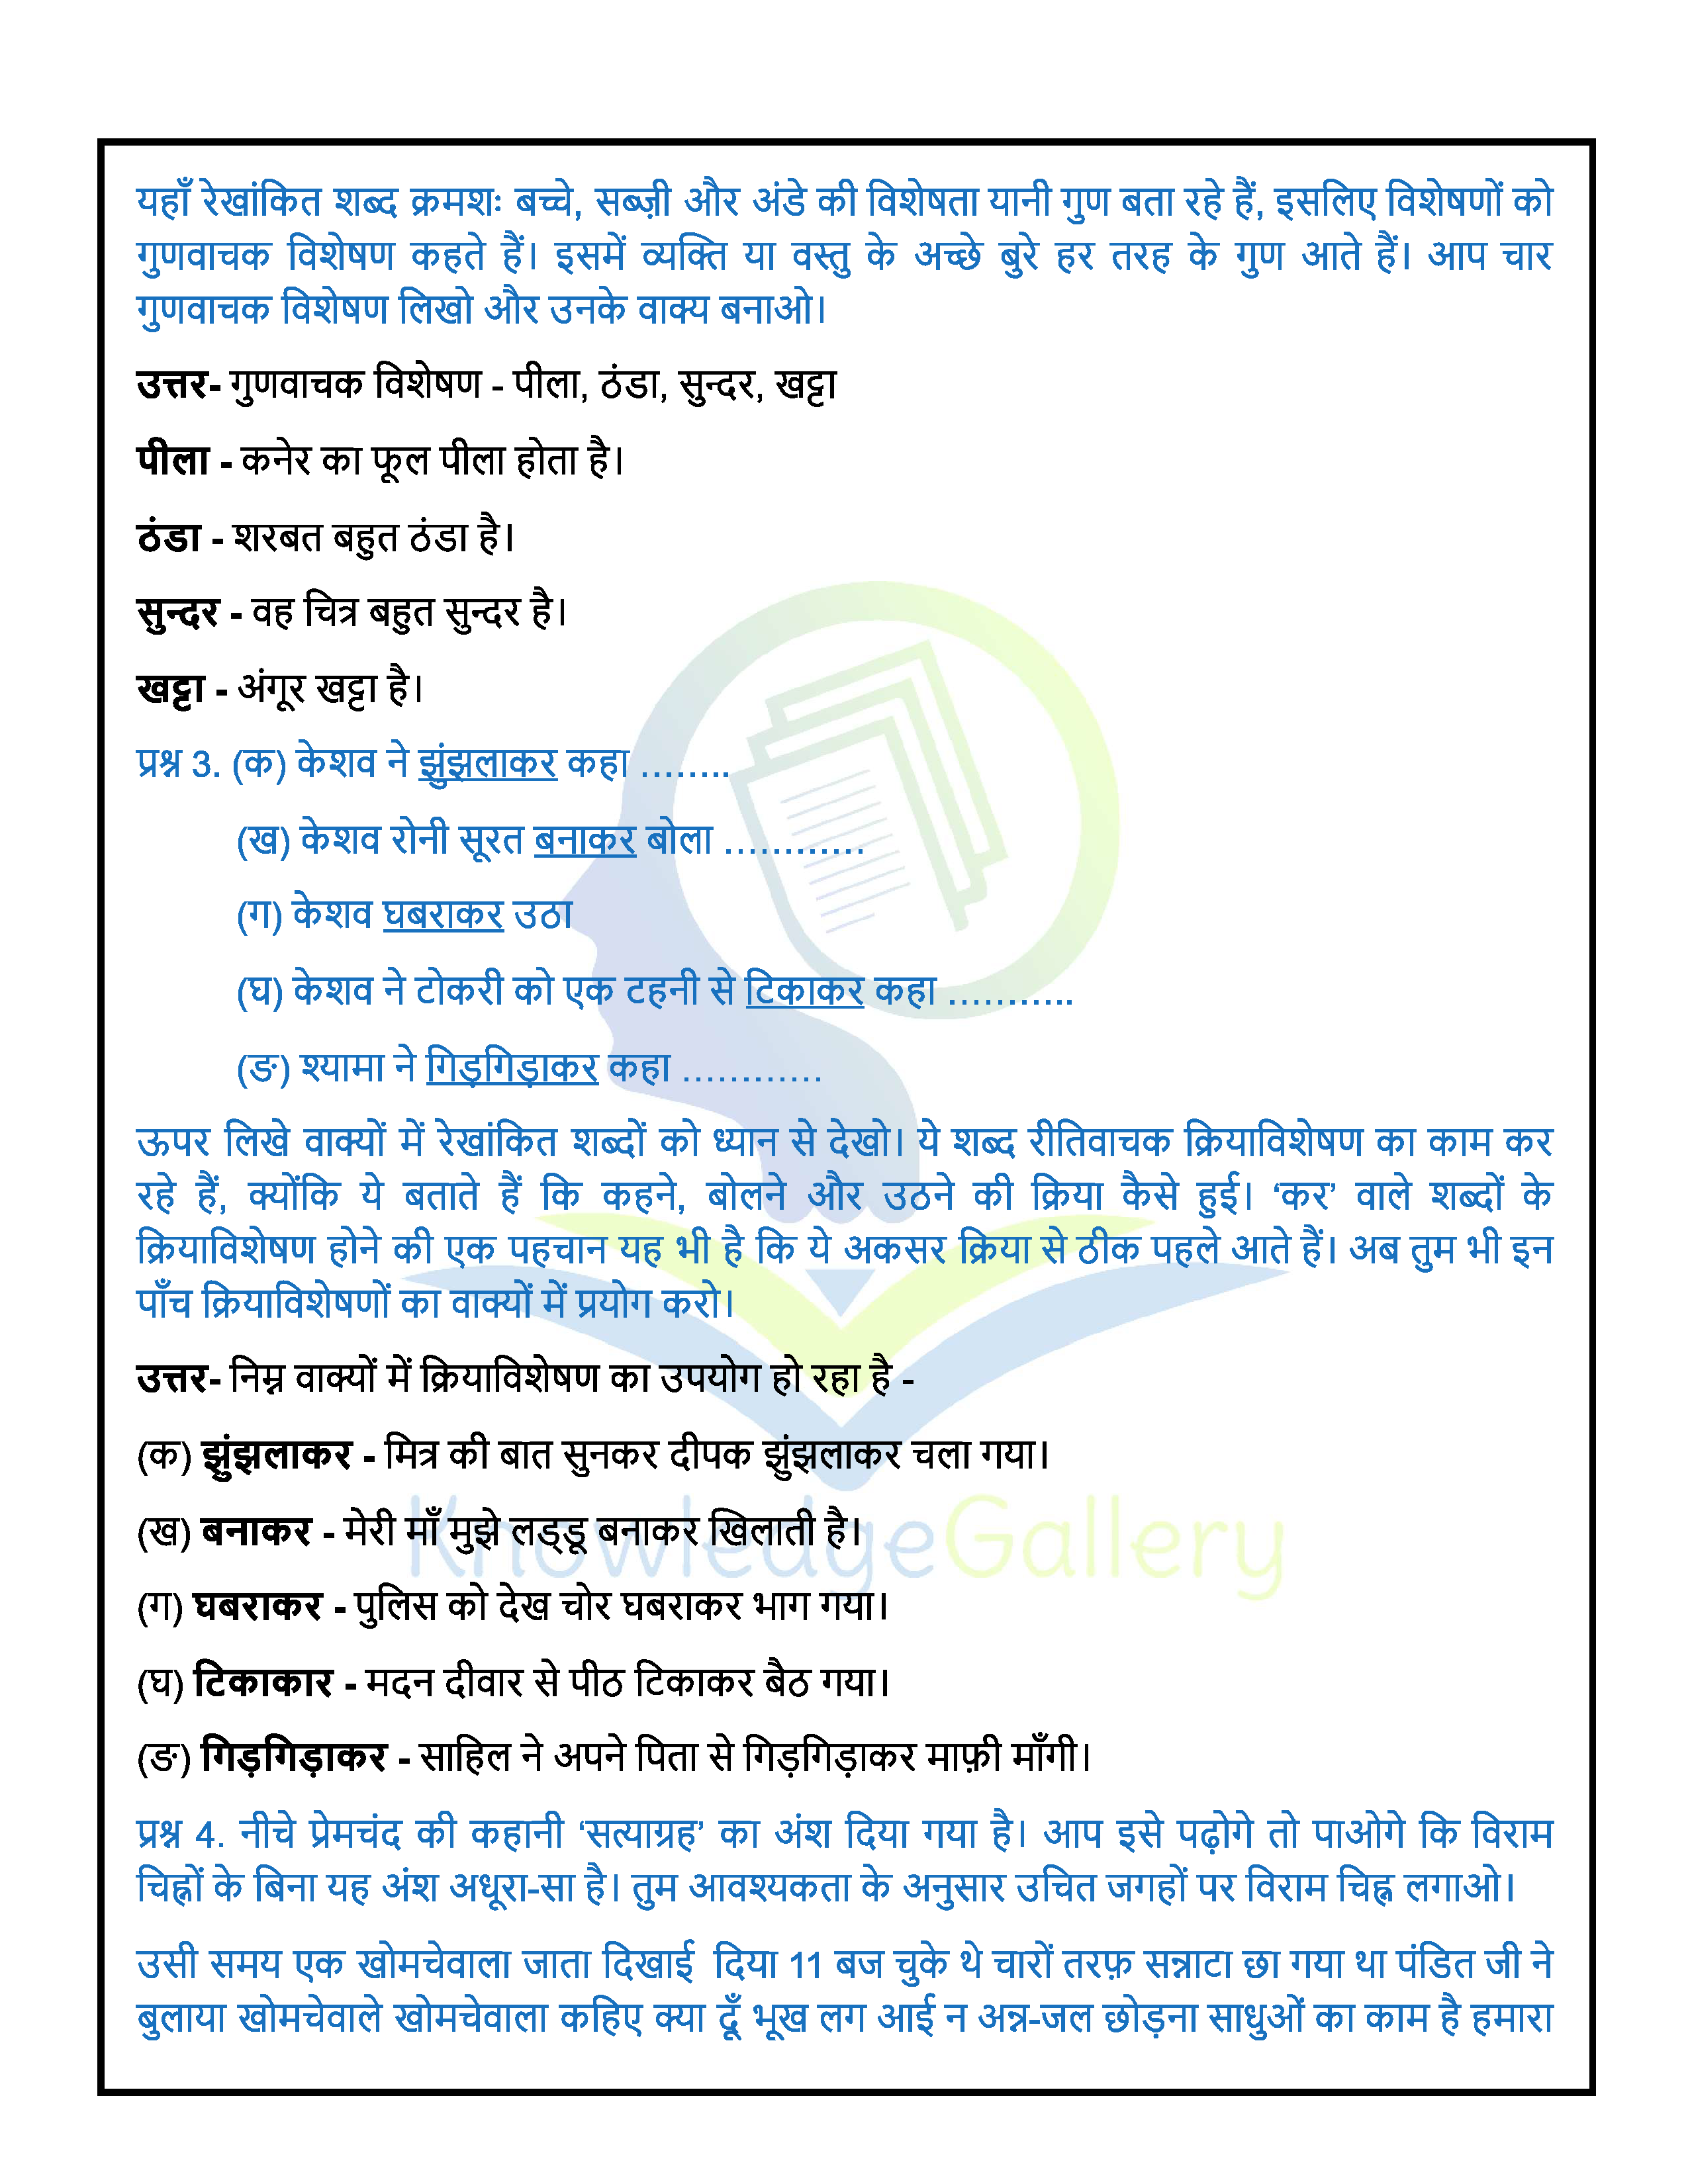 NCERT Solution For Class 6 Hindi Chapter 3 part 4